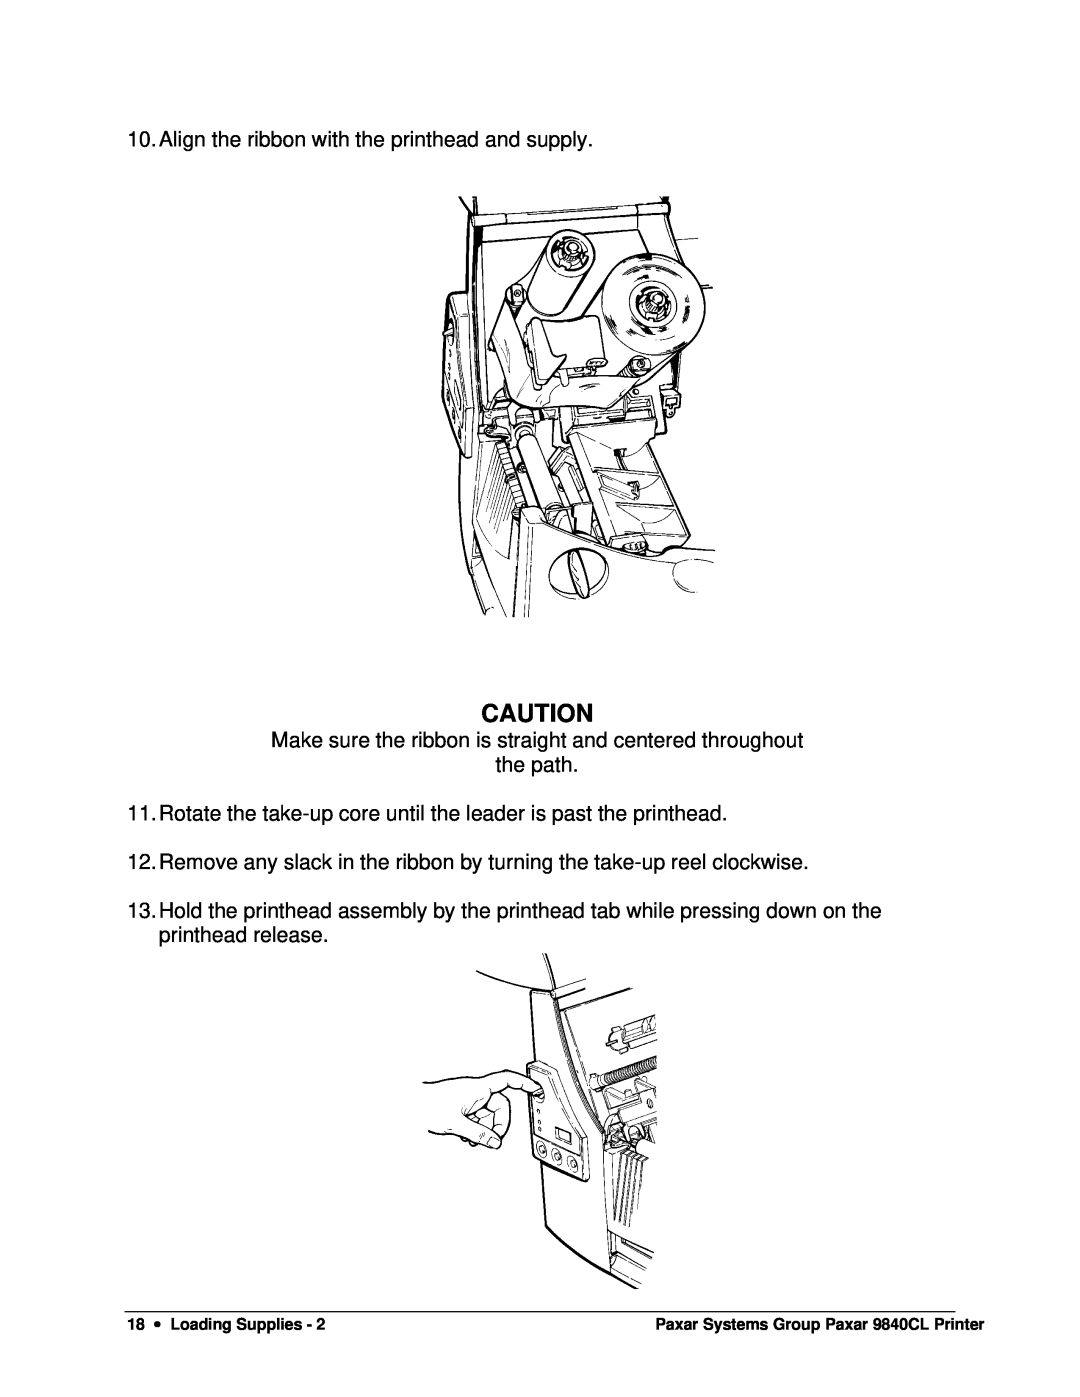 Paxar 9840CL user manual Align the ribbon with the printhead and supply 